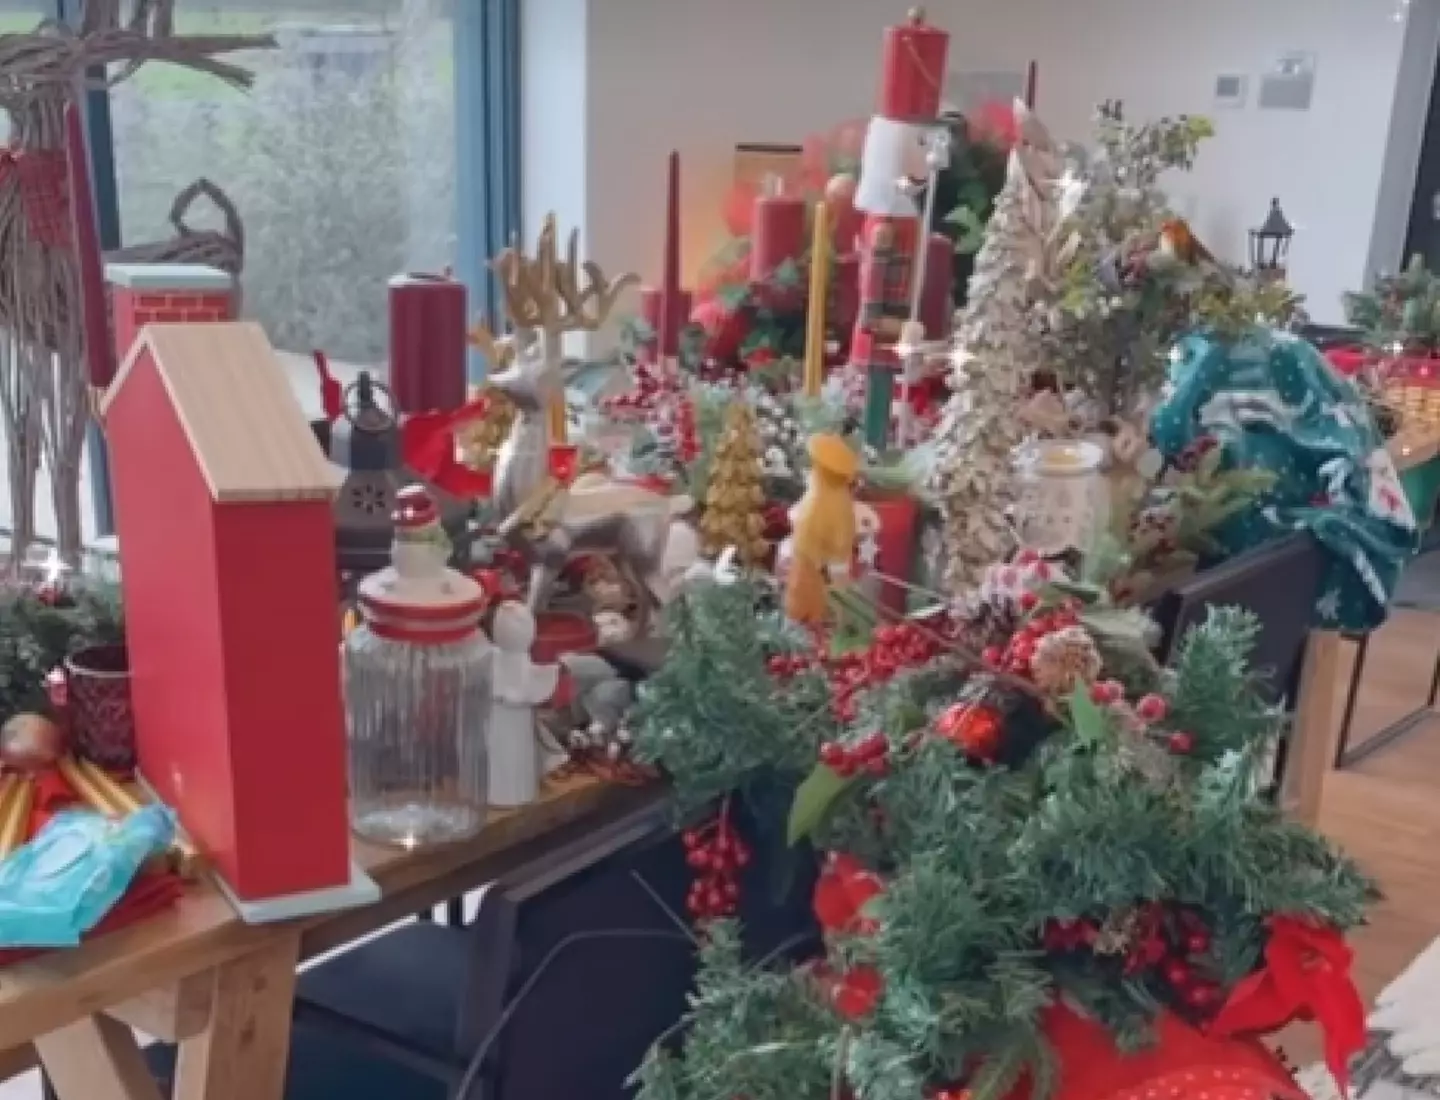 The Love Island star showed all her decorations were ready to be put away.